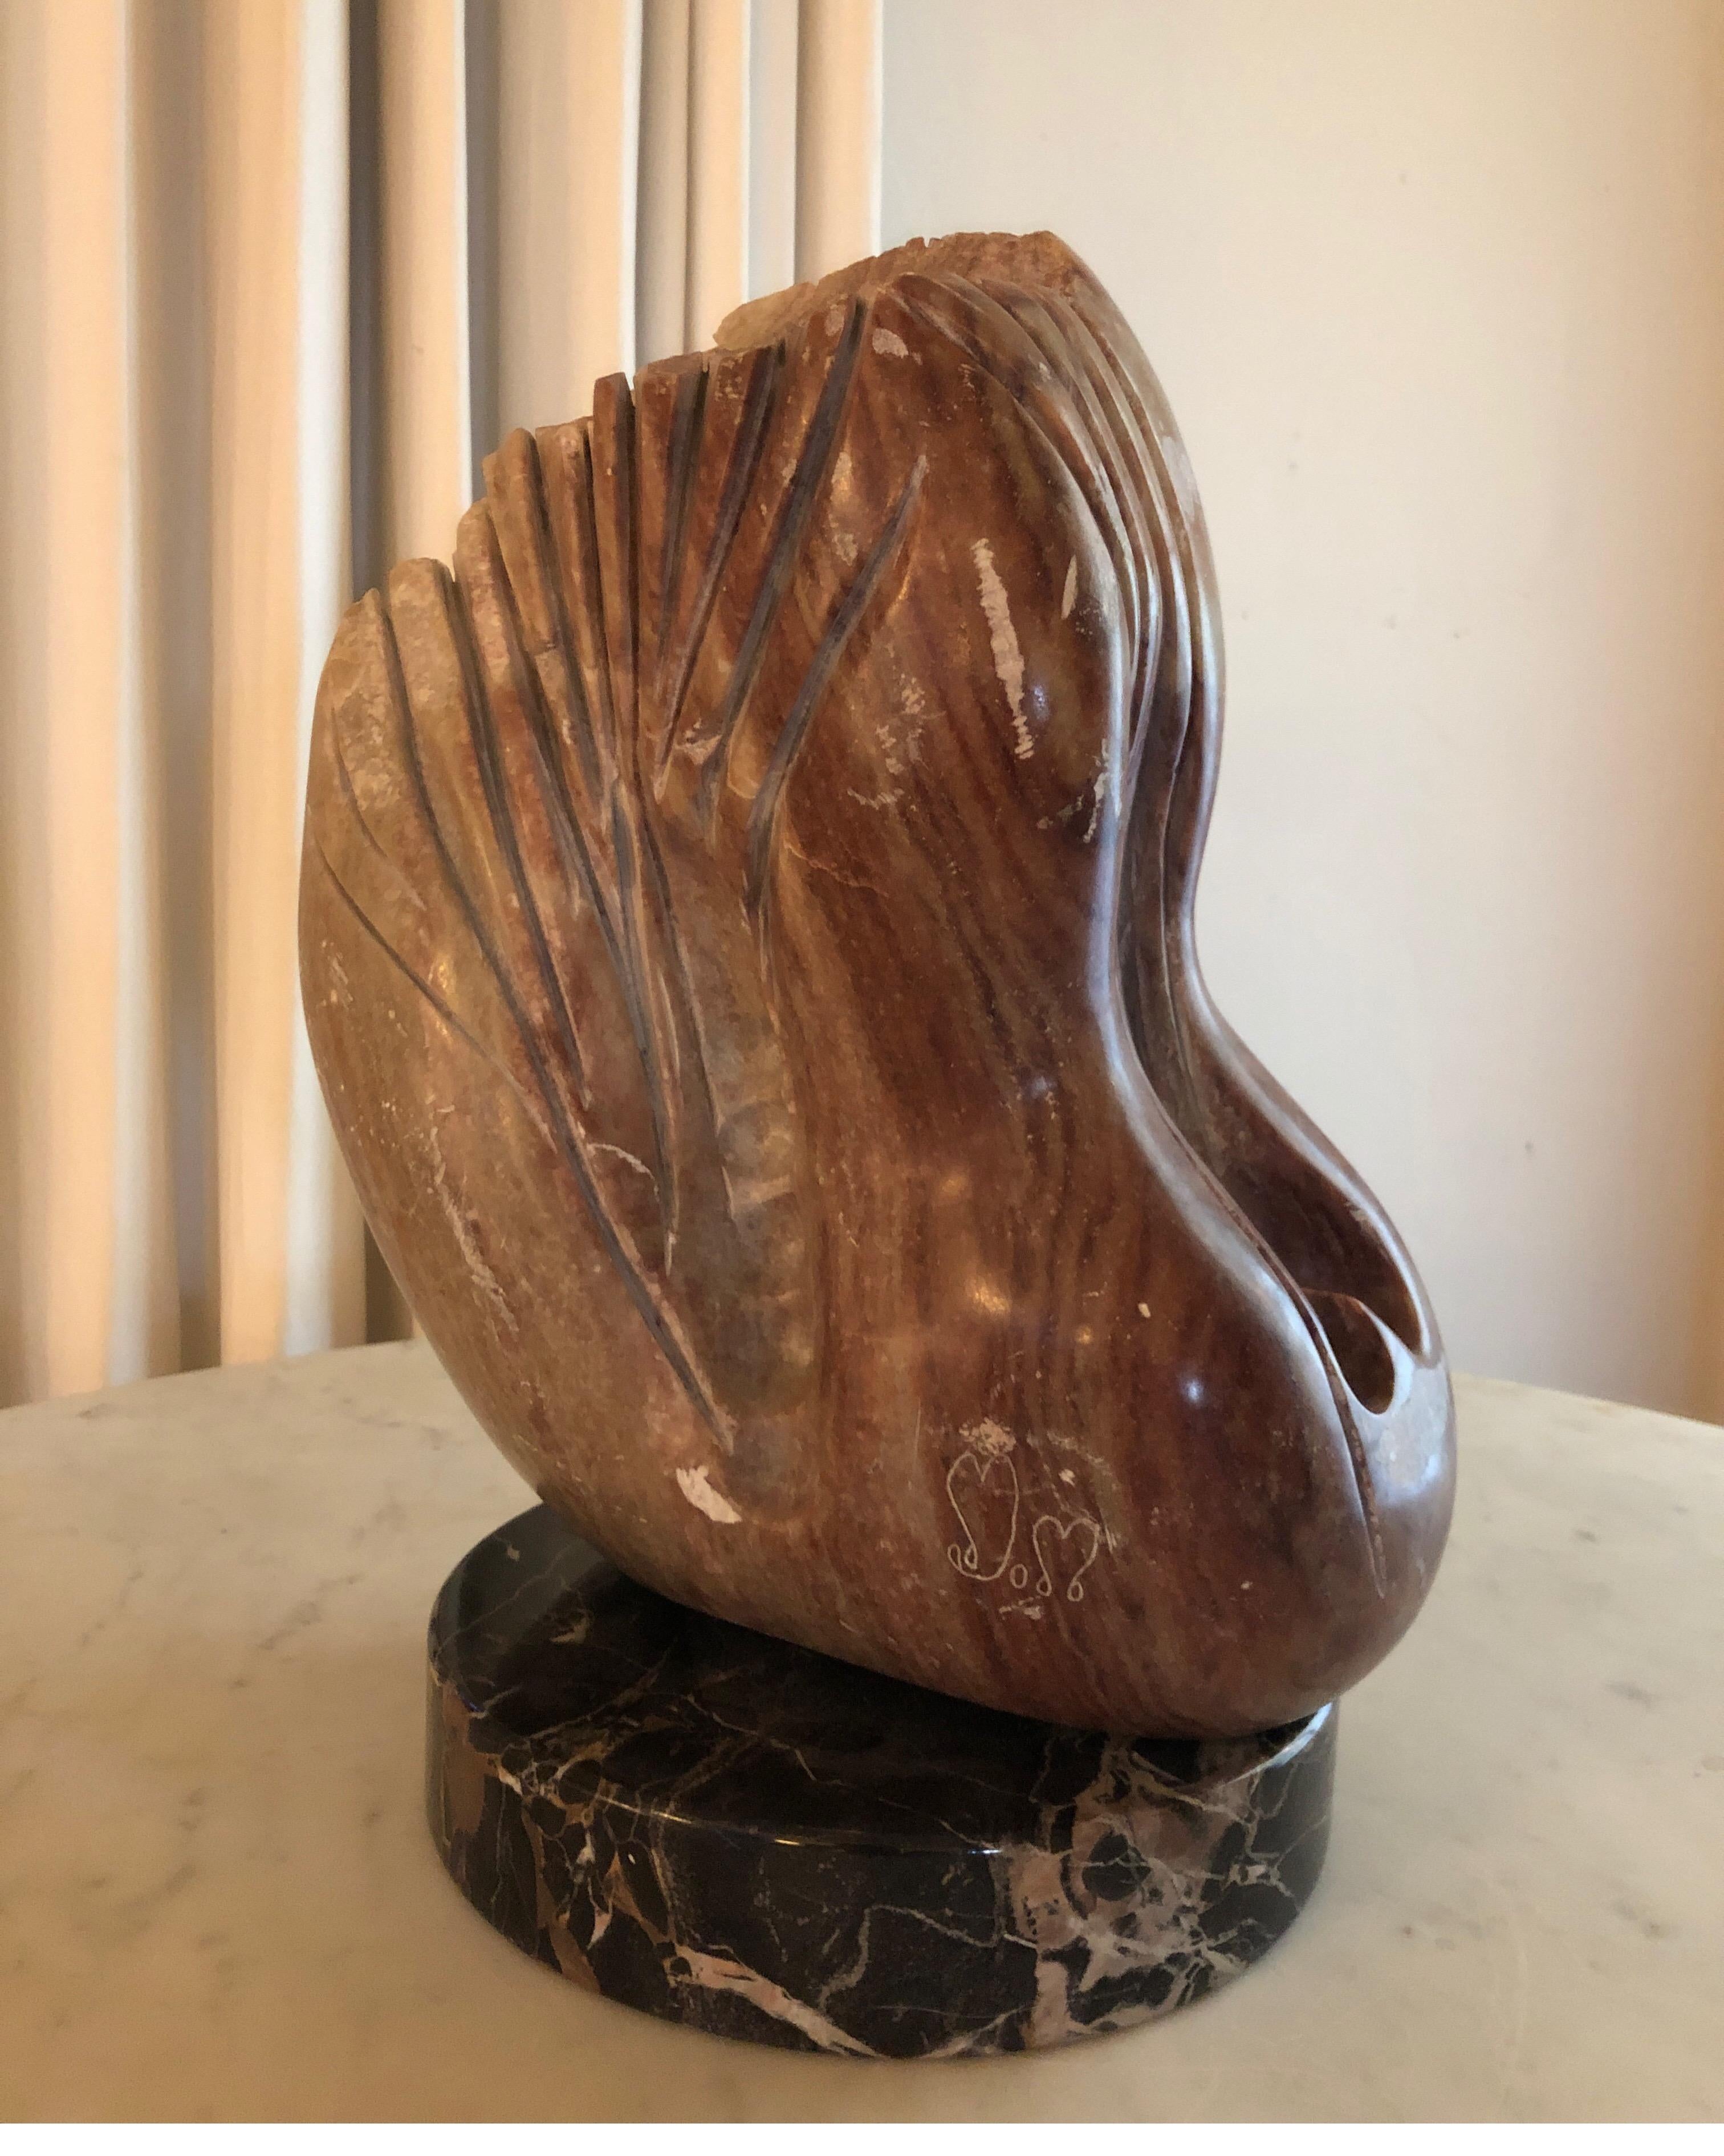 Large marble stone sculpture.
Created and signed by Romanian/American Artist Yehuda 